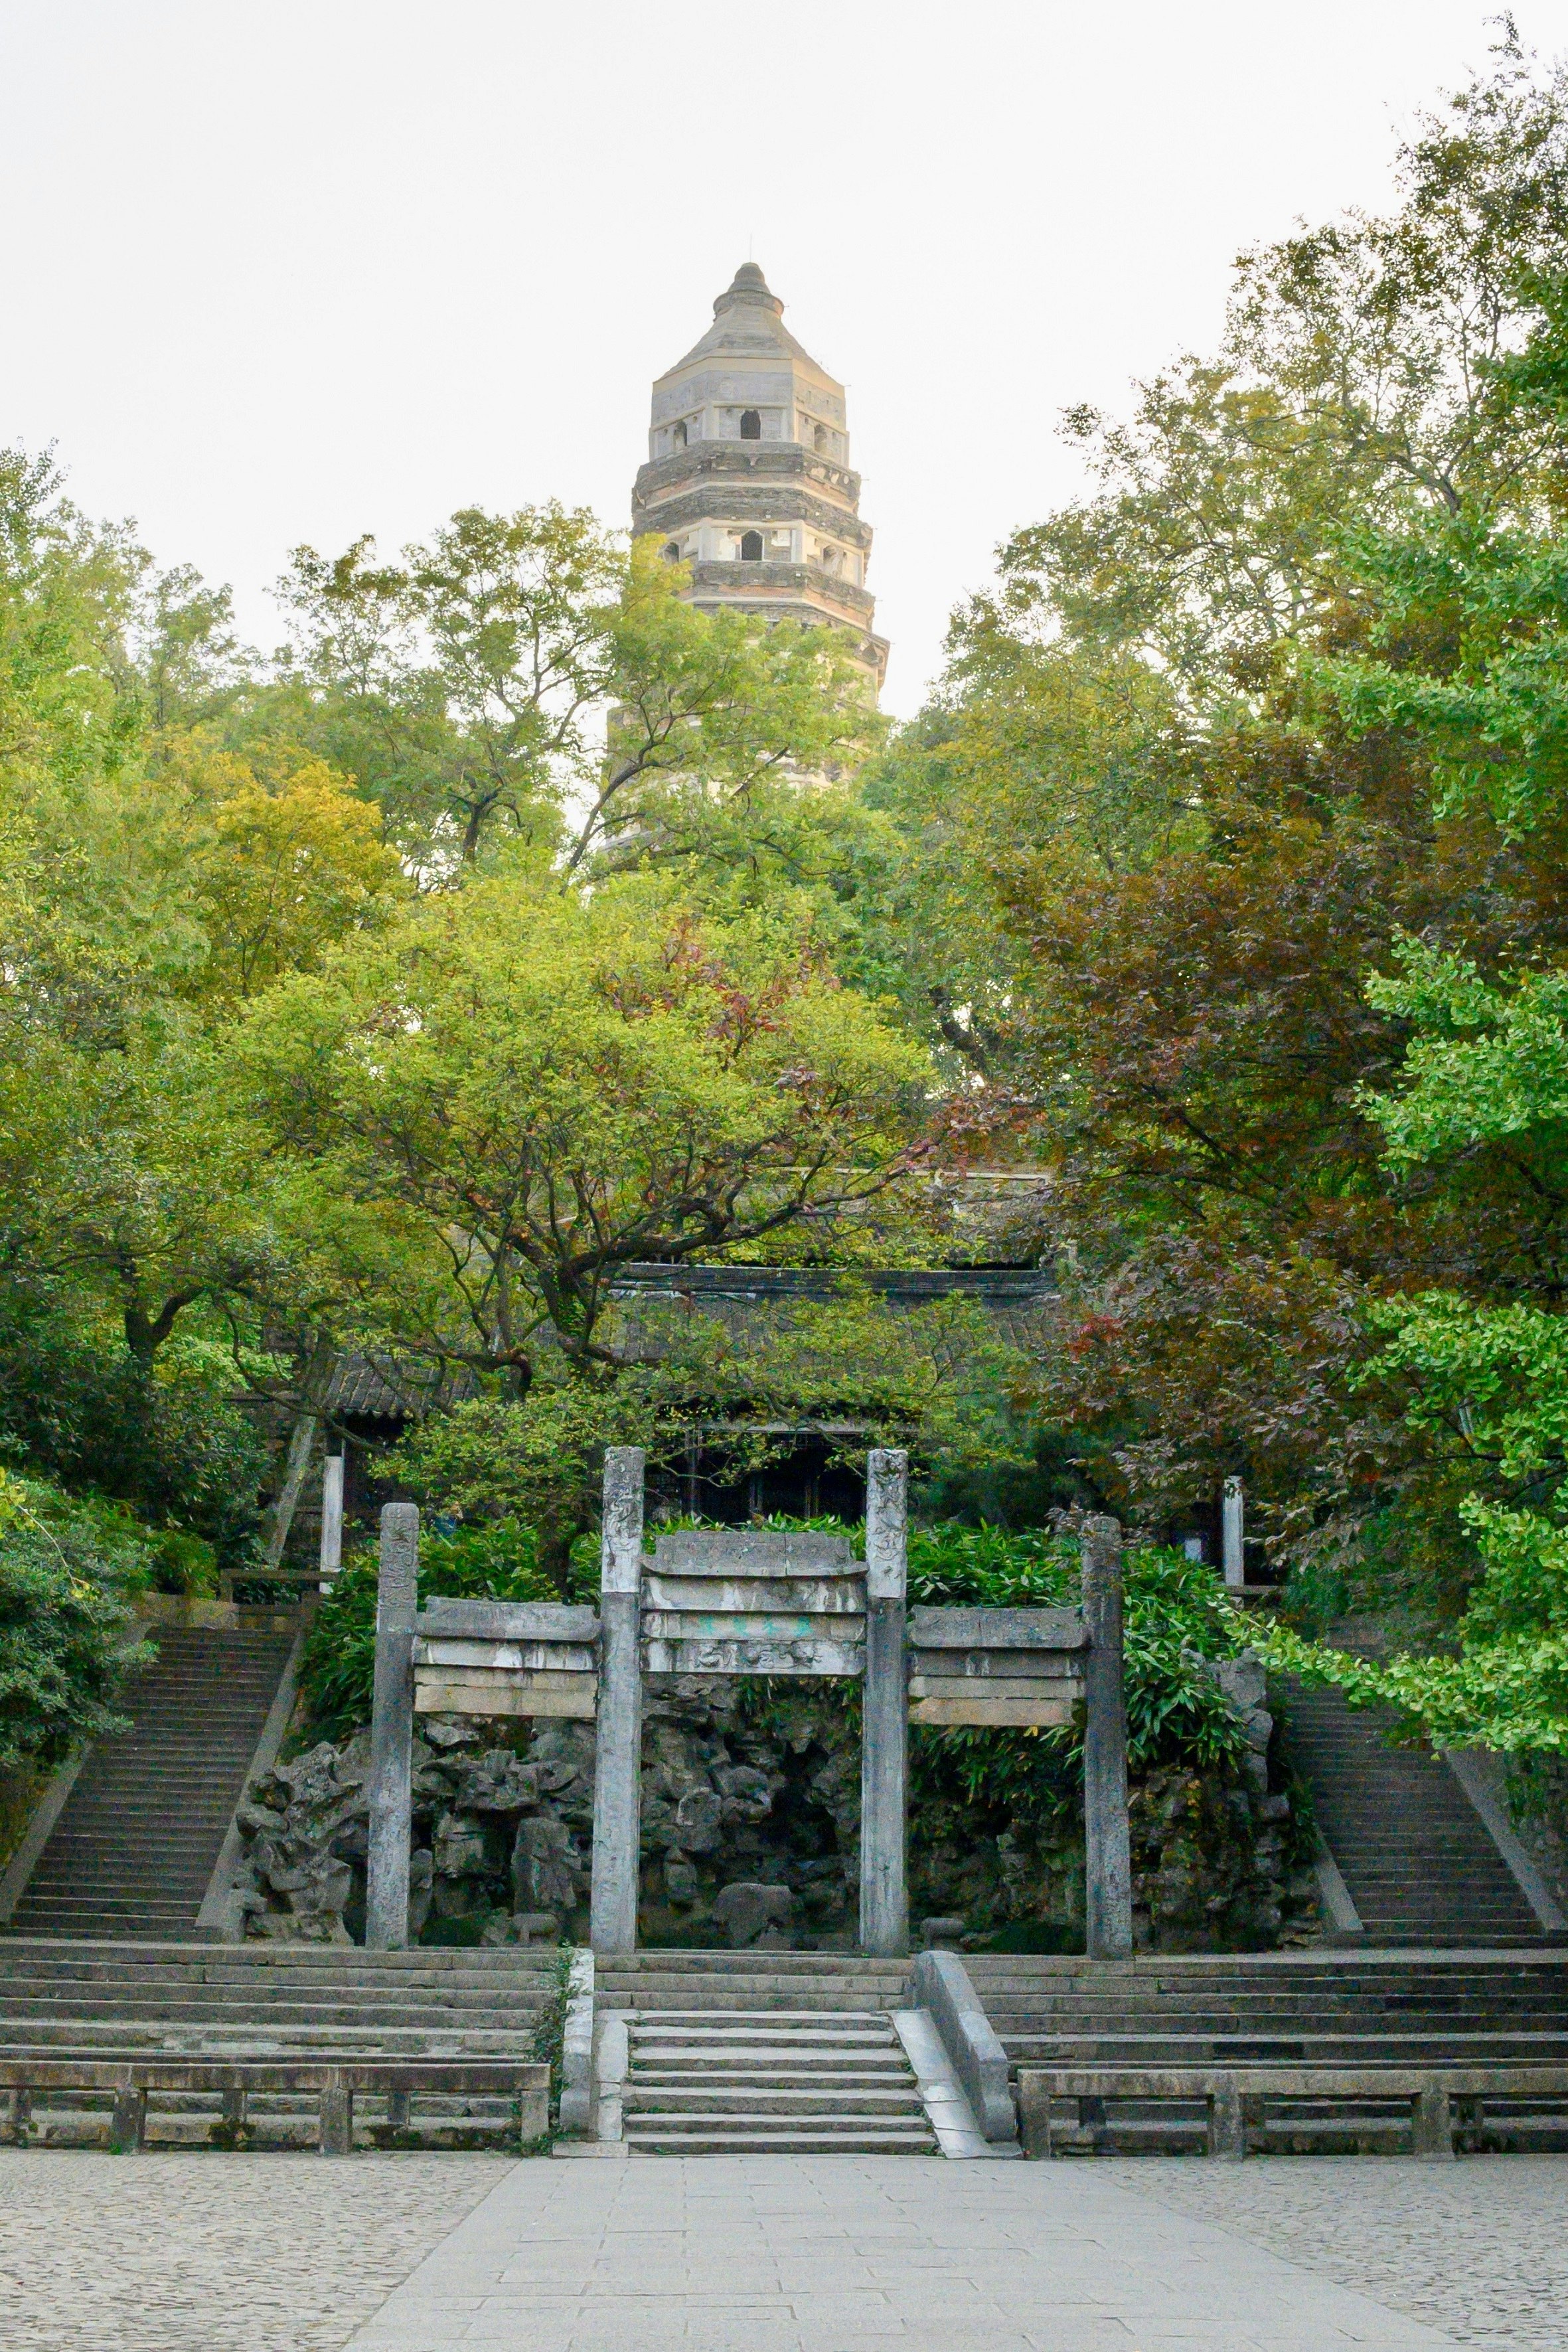 A landscape view of Tiger Hill with the brick Cloud Rock Pagoda atop it. There are steps leading up the hill, which are flanked by greenery.